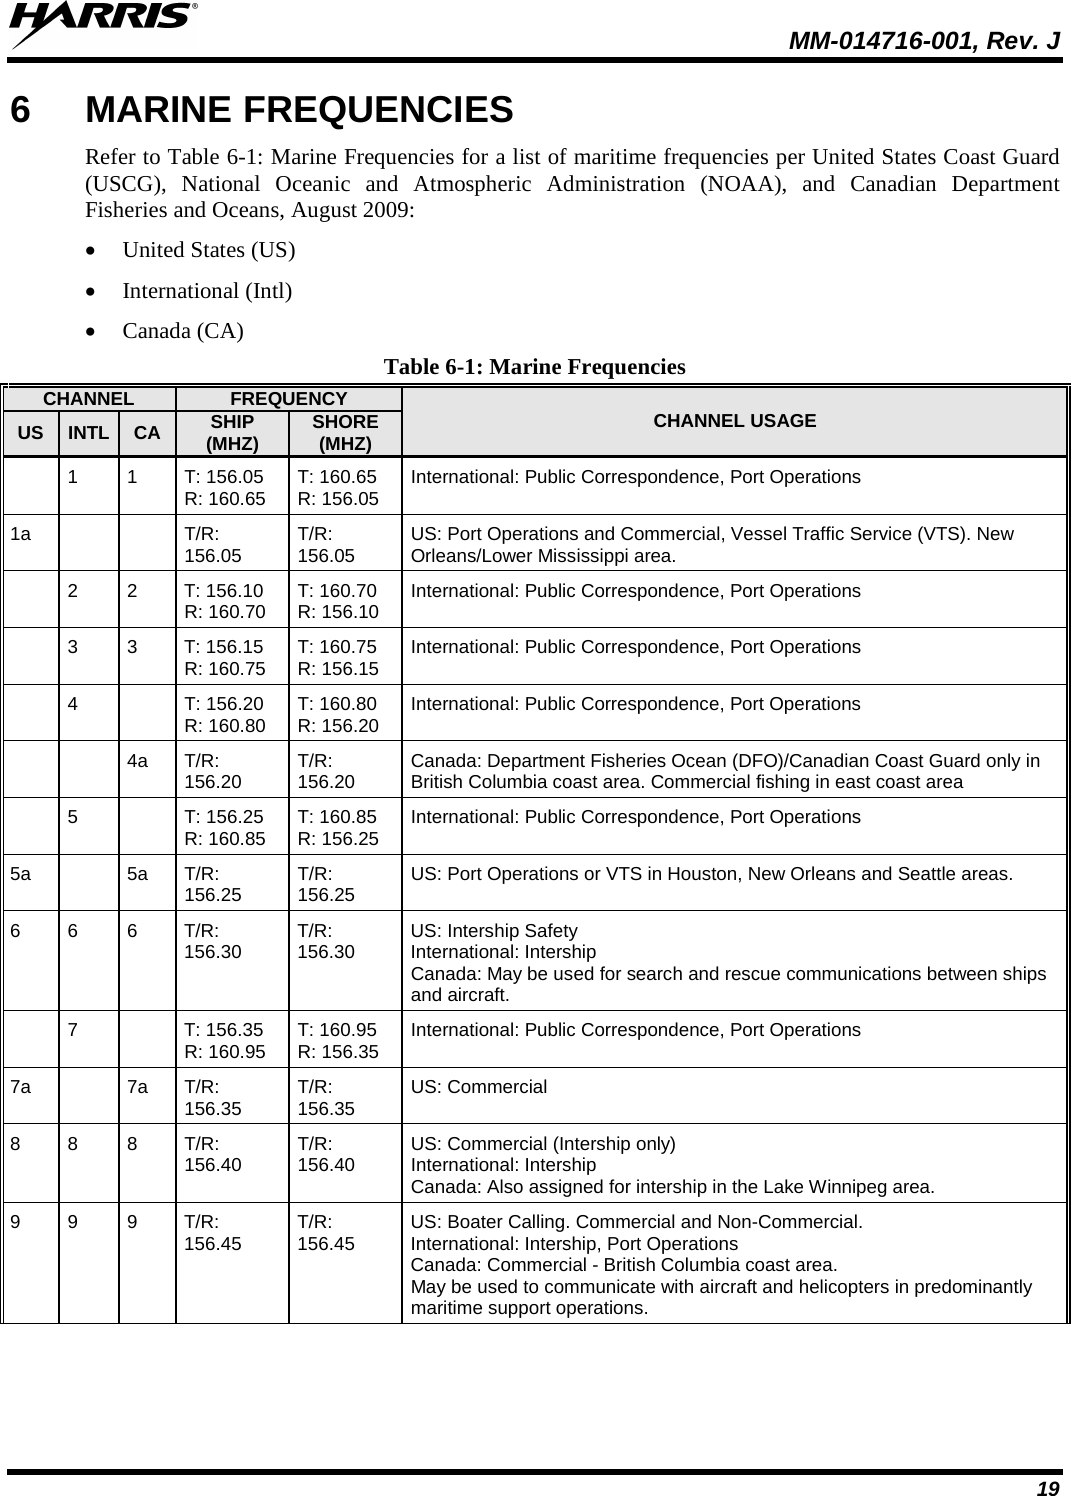  MM-014716-001, Rev. J 19 6  MARINE FREQUENCIES Refer to Table 6-1: Marine Frequencies for a list of maritime frequencies per United States Coast Guard (USCG), National Oceanic and Atmospheric Administration (NOAA), and Canadian Department Fisheries and Oceans, August 2009: • United States (US) • International (Intl) • Canada (CA) Table 6-1: Marine Frequencies CHANNEL FREQUENCY CHANNEL USAGE US INTL CA SHIP (MHZ) SHORE (MHZ)  1 1 T: 156.05 R: 160.65 T: 160.65 R: 156.05 International: Public Correspondence, Port Operations 1a   T/R: 156.05 T/R: 156.05 US: Port Operations and Commercial, Vessel Traffic Service (VTS). New Orleans/Lower Mississippi area.    2  2  T: 156.10 R: 160.70 T: 160.70  R: 156.10 International: Public Correspondence, Port Operations   3  3  T: 156.15 R: 160.75 T: 160.75 R: 156.15 International: Public Correspondence, Port Operations  4  T: 156.20  R: 160.80 T: 160.80  R: 156.20 International: Public Correspondence, Port Operations   4a T/R: 156.20 T/R: 156.20 Canada: Department Fisheries Ocean (DFO)/Canadian Coast Guard only in British Columbia coast area. Commercial fishing in east coast area  5  T: 156.25  R: 160.85 T: 160.85  R: 156.25 International: Public Correspondence, Port Operations 5a  5a T/R: 156.25 T/R: 156.25 US: Port Operations or VTS in Houston, New Orleans and Seattle areas. 6  6  6  T/R: 156.30 T/R: 156.30 US: Intership Safety International: Intership Canada: May be used for search and rescue communications between ships and aircraft.   7    T: 156.35  R: 160.95 T: 160.95  R: 156.35 International: Public Correspondence, Port Operations 7a    7a T/R: 156.35 T/R: 156.35 US: Commercial 8 8 8 T/R: 156.40 T/R: 156.40 US: Commercial (Intership only) International: Intership Canada: Also assigned for intership in the Lake Winnipeg area. 9  9  9  T/R: 156.45 T/R: 156.45 US: Boater Calling. Commercial and Non-Commercial. International: Intership, Port Operations Canada: Commercial - British Columbia coast area. May be used to communicate with aircraft and helicopters in predominantly maritime support operations. 